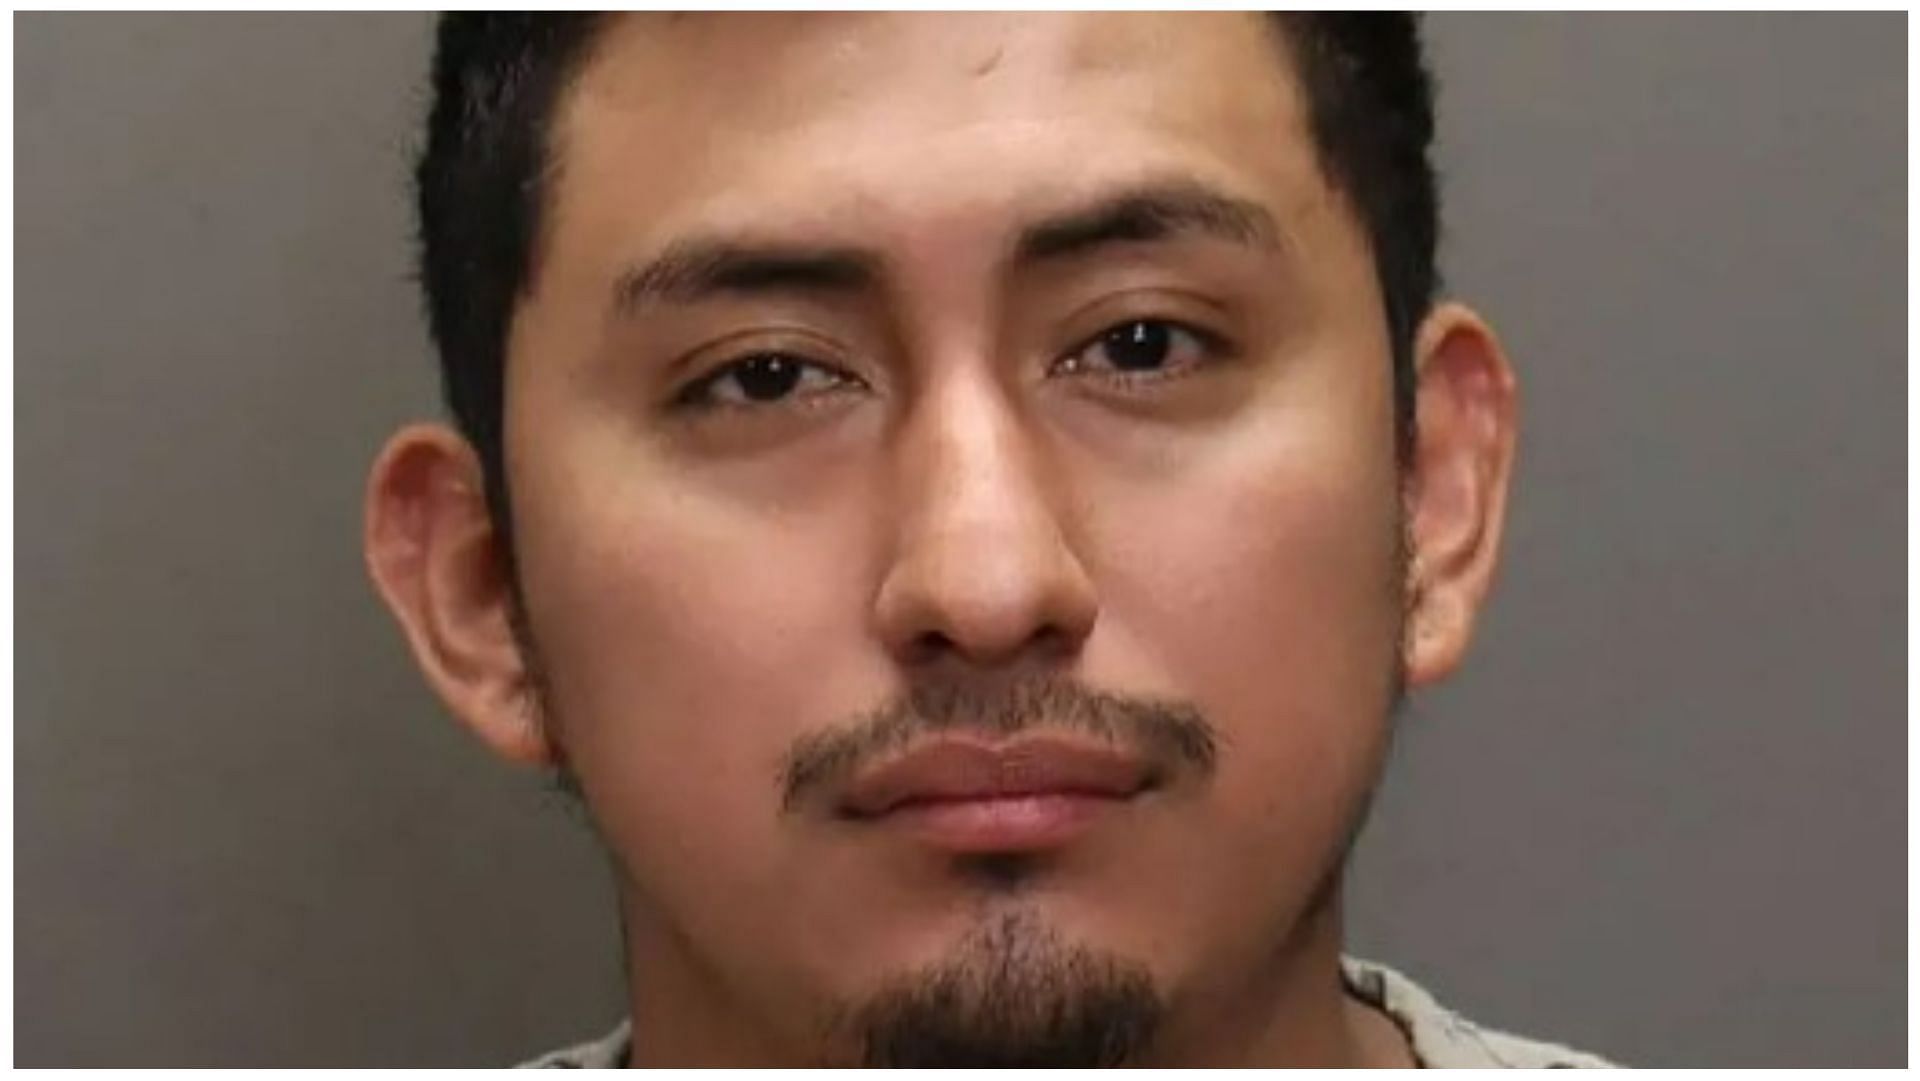 Gerson Fuentes accused of assaulting &amp; impregnating 10-year-old child (Image via Franklin County Sheriff&#039;s Office)